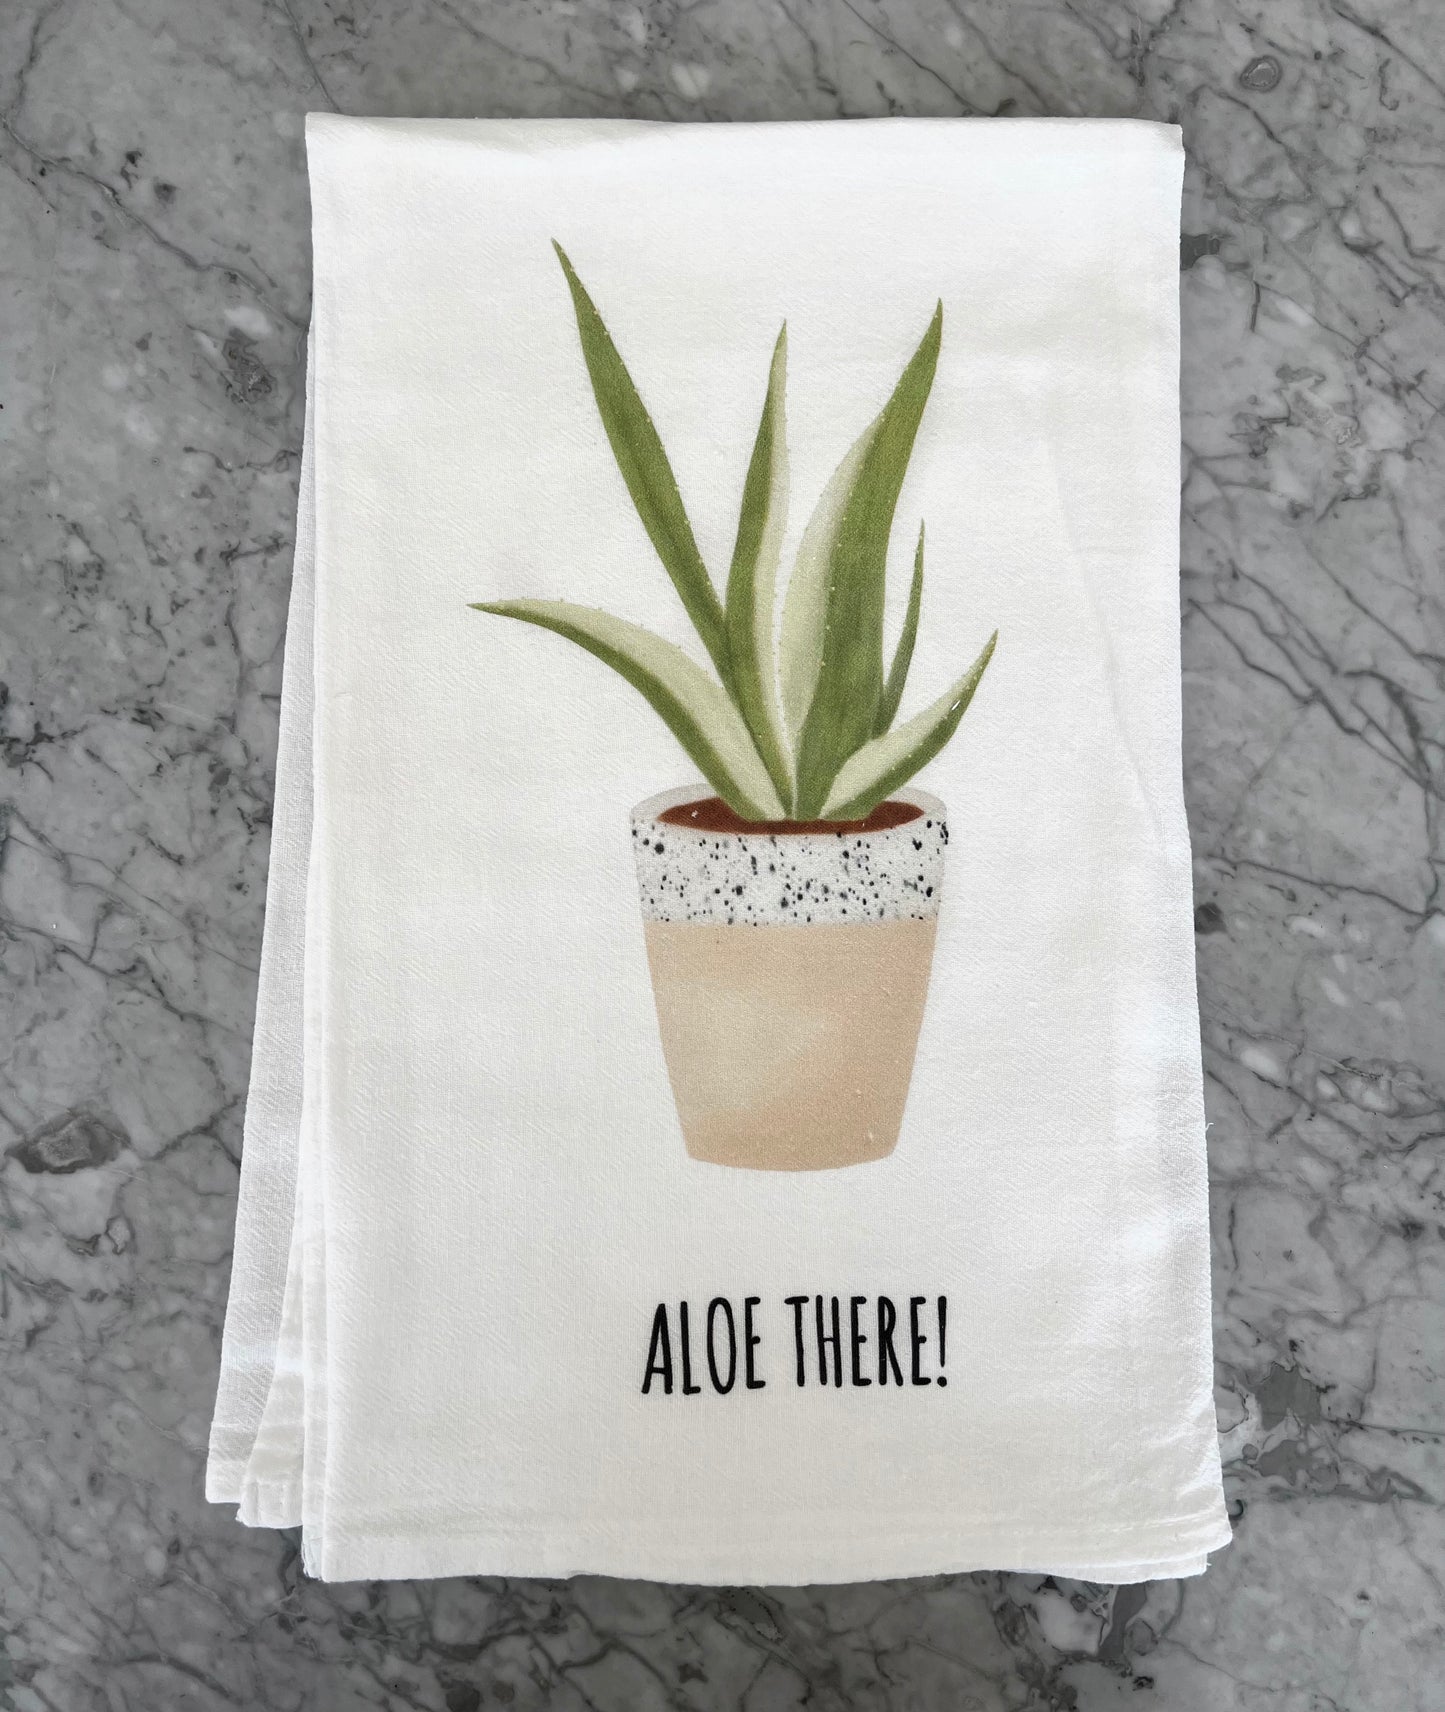 Aloe There!